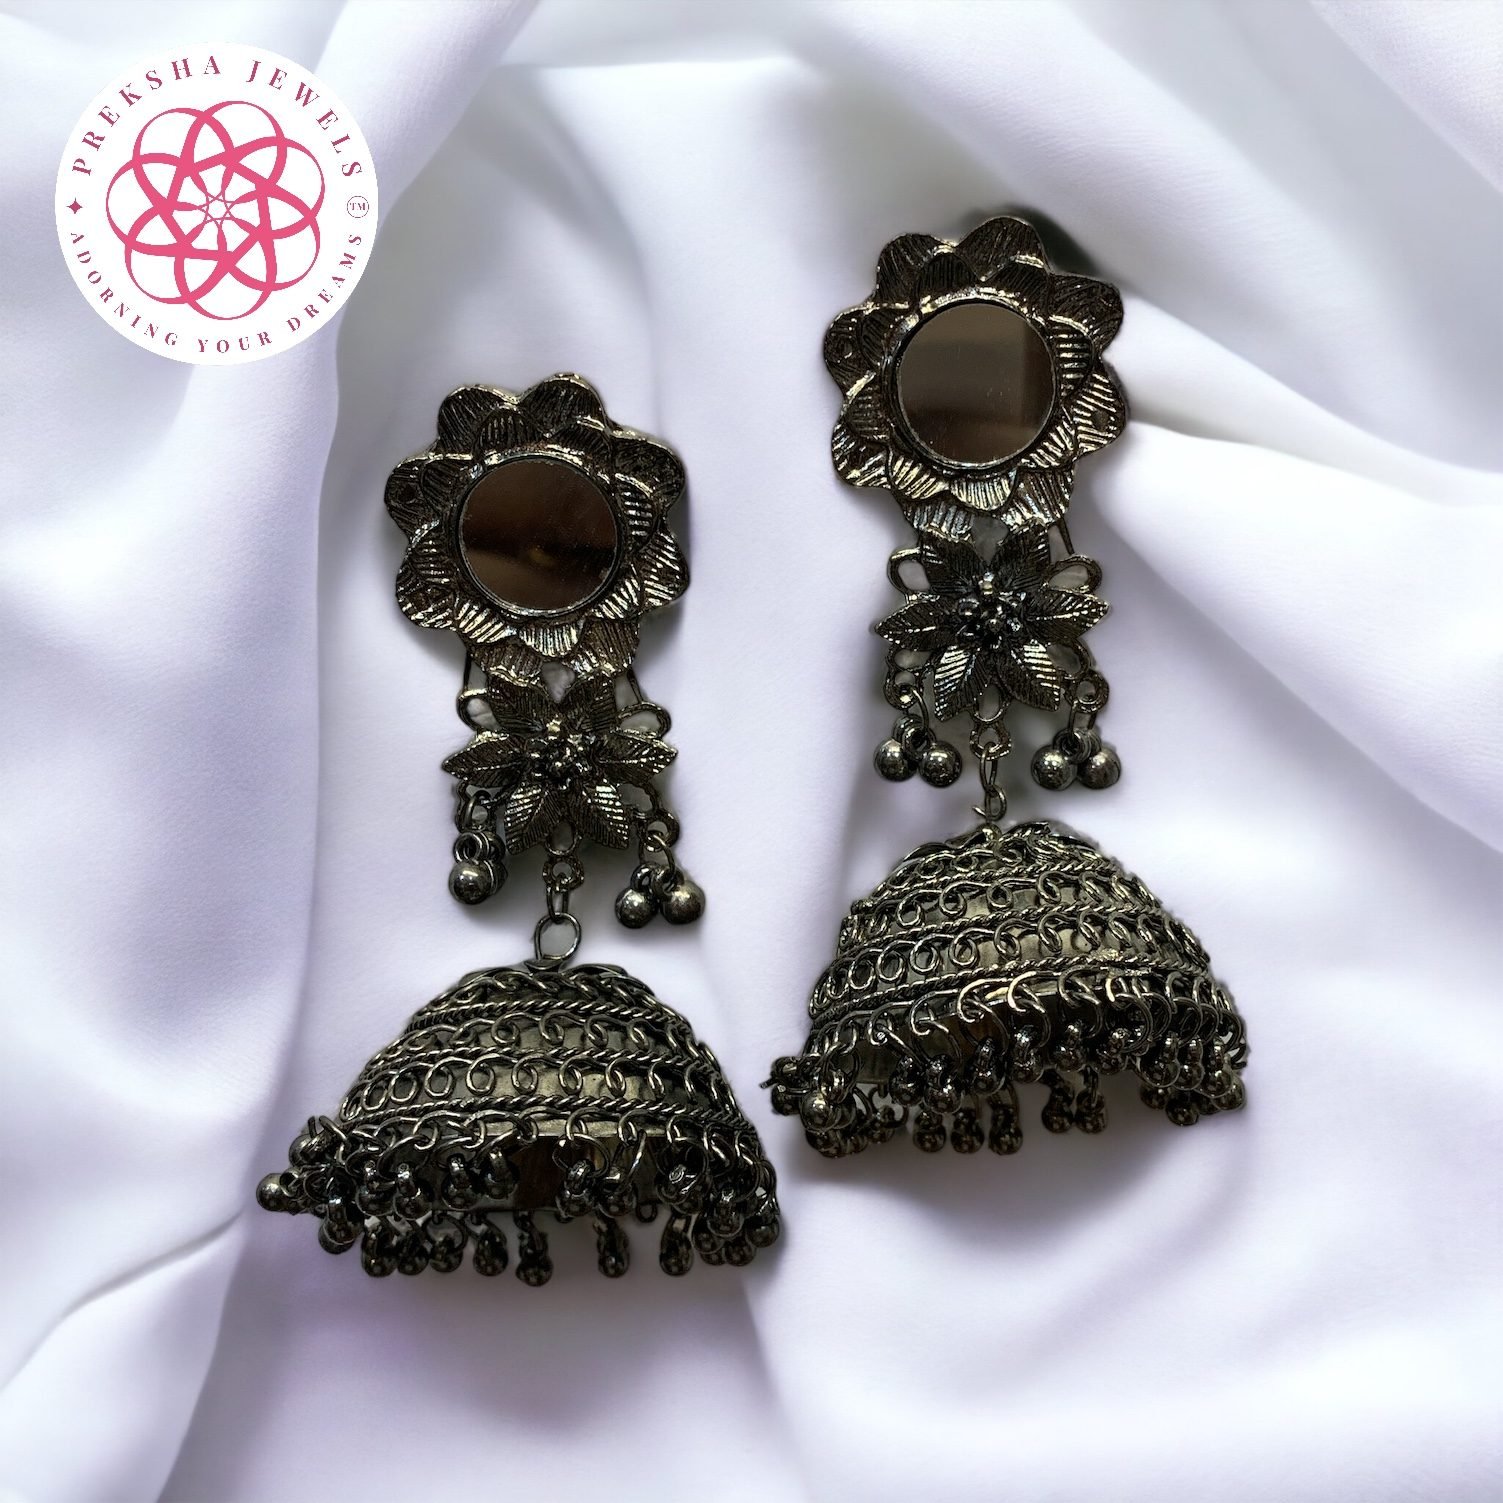 Buy Online Black colour Drop Design Hanging Earrings for Girls and Women   One Stop Fashion